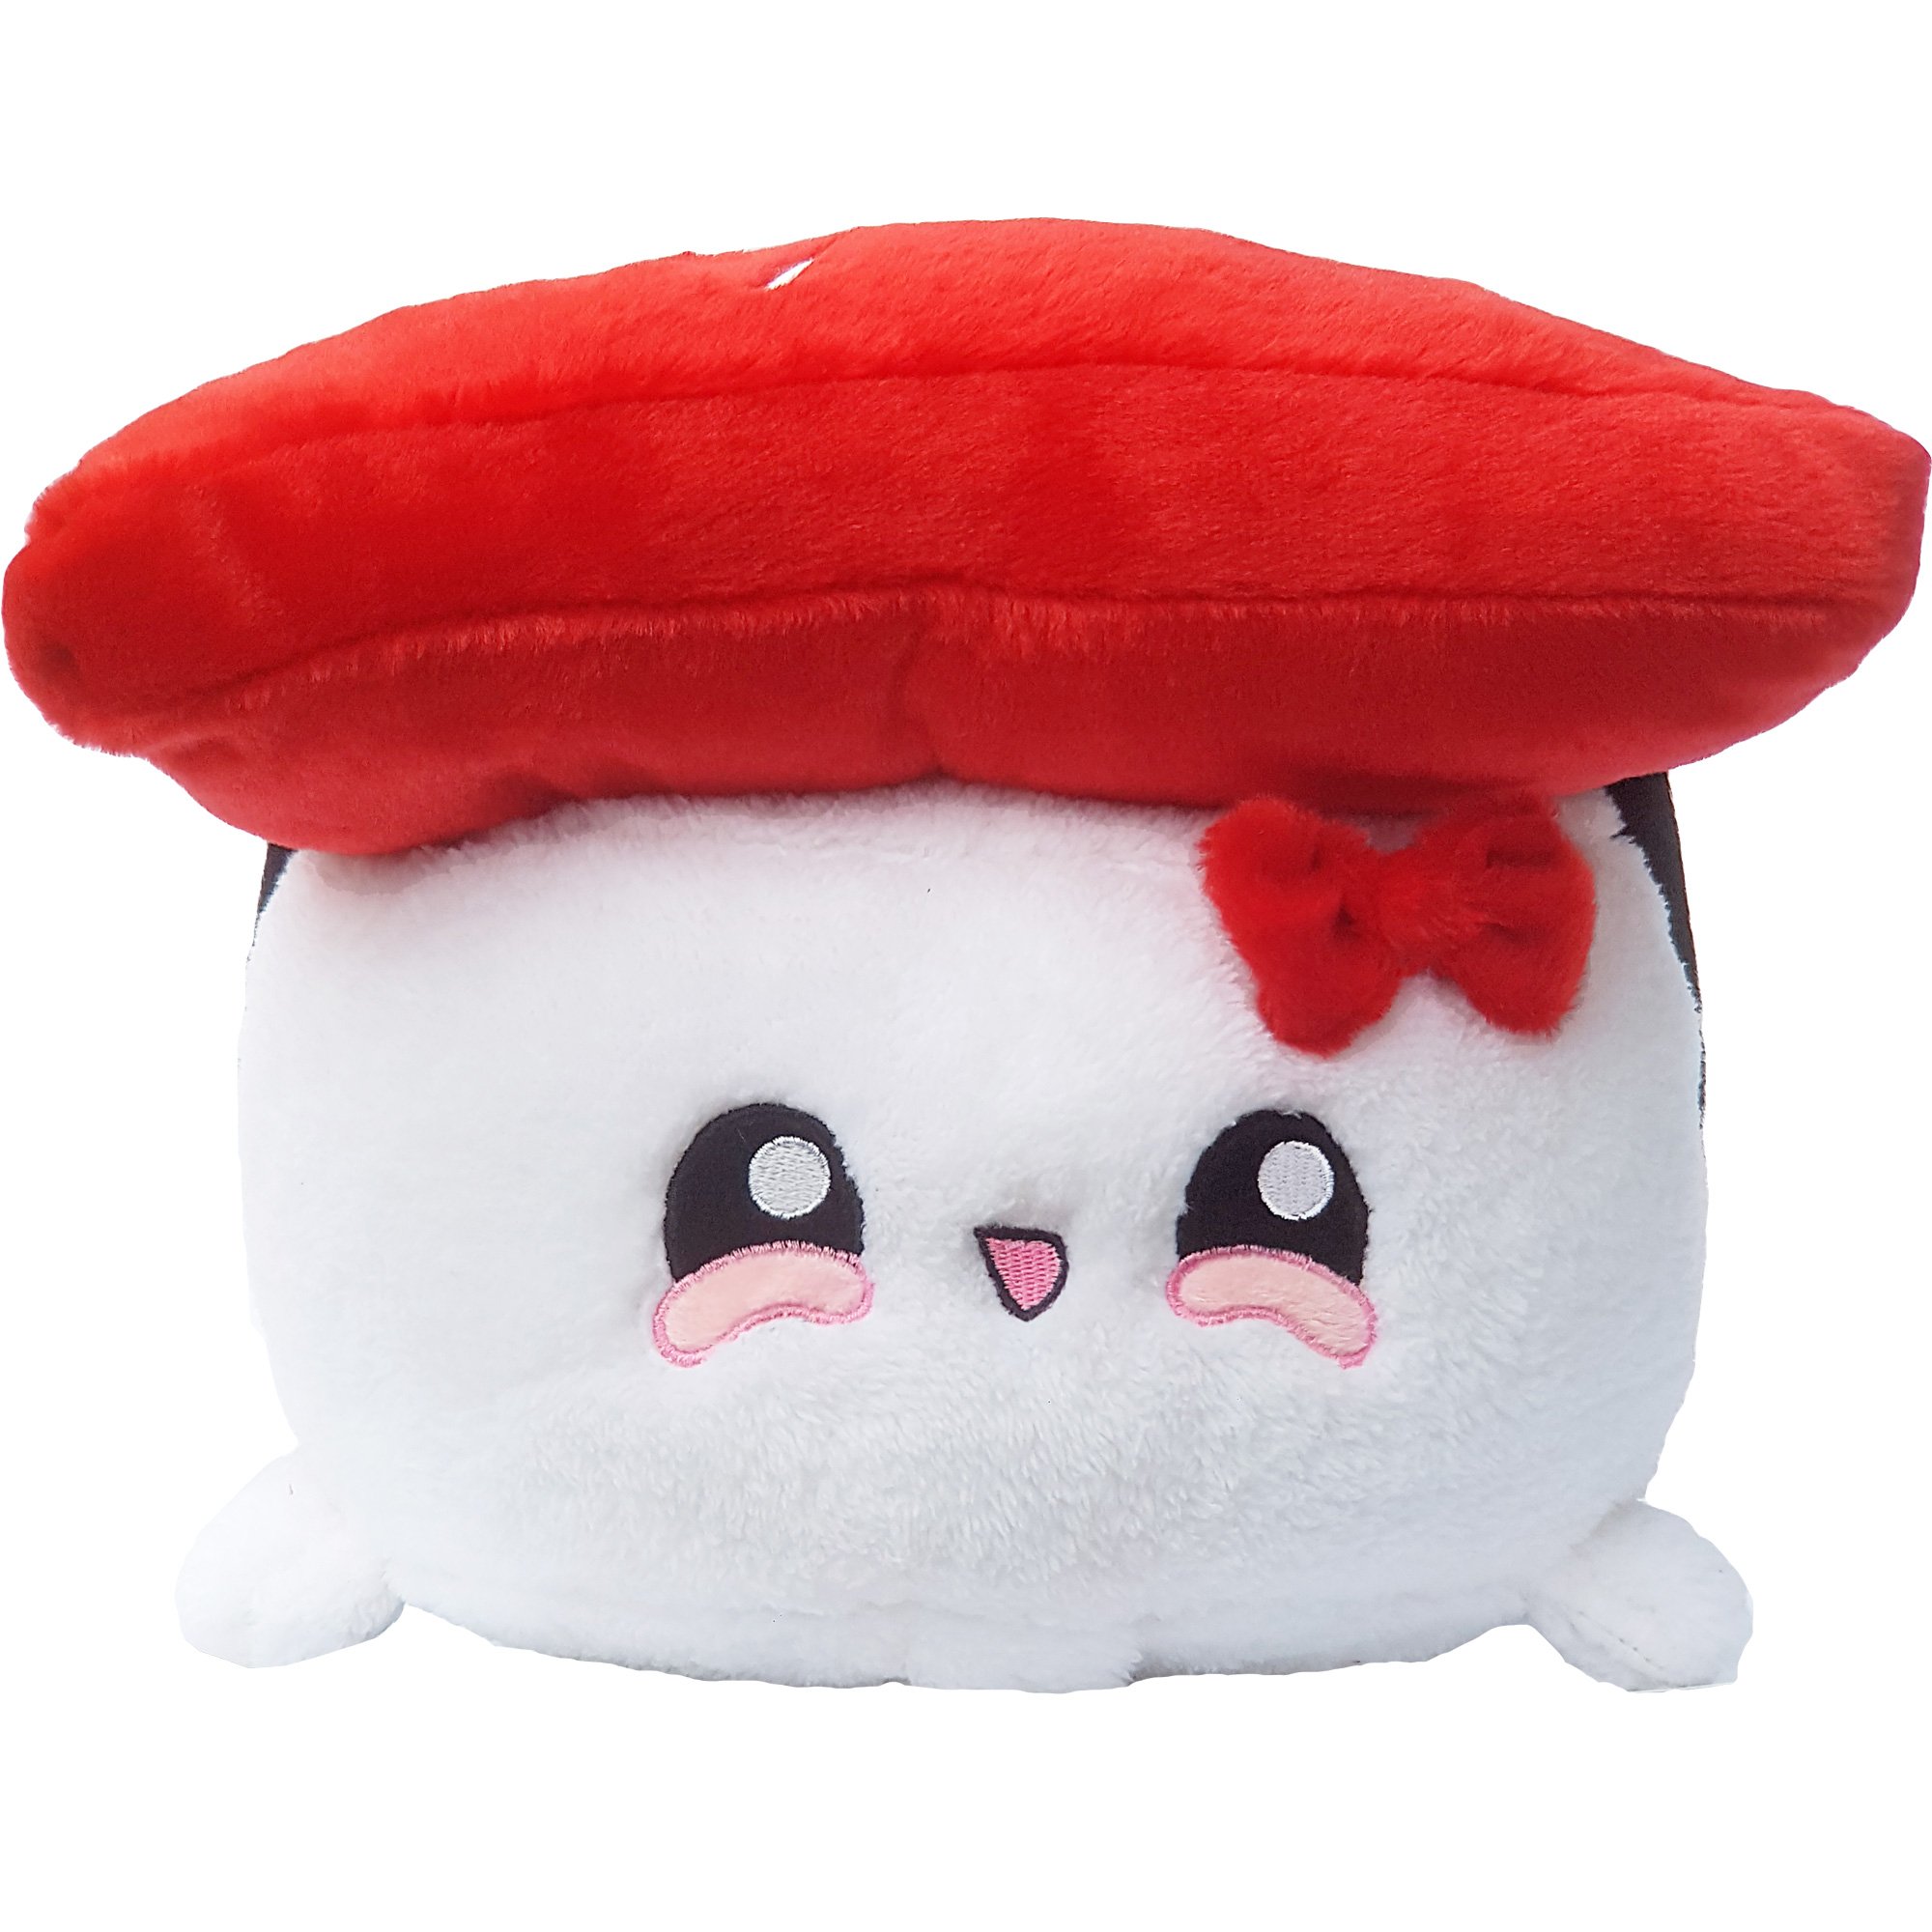 Sushi Pillow Smiley Pillow Toy Red Girl Japan